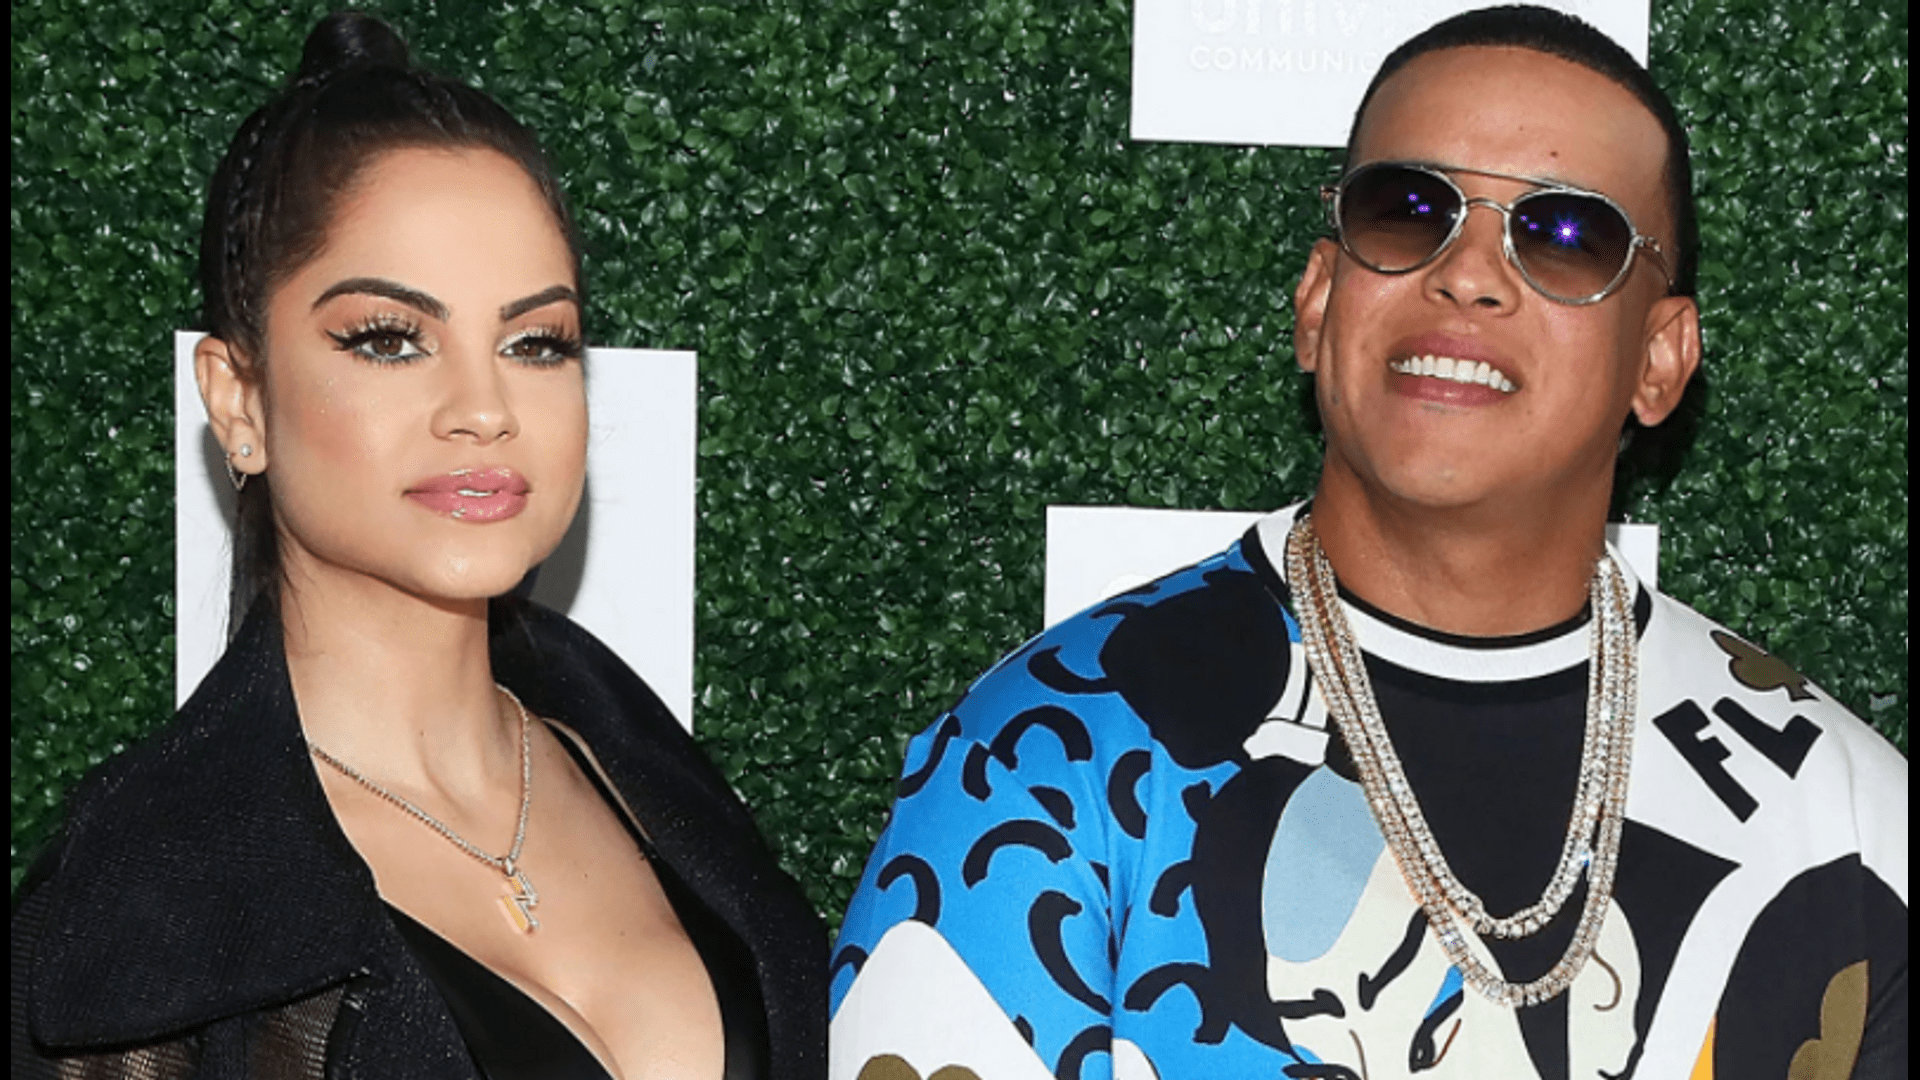 Daddy Yankee turns on Instagram with a video with Natti Natasha and Becky G